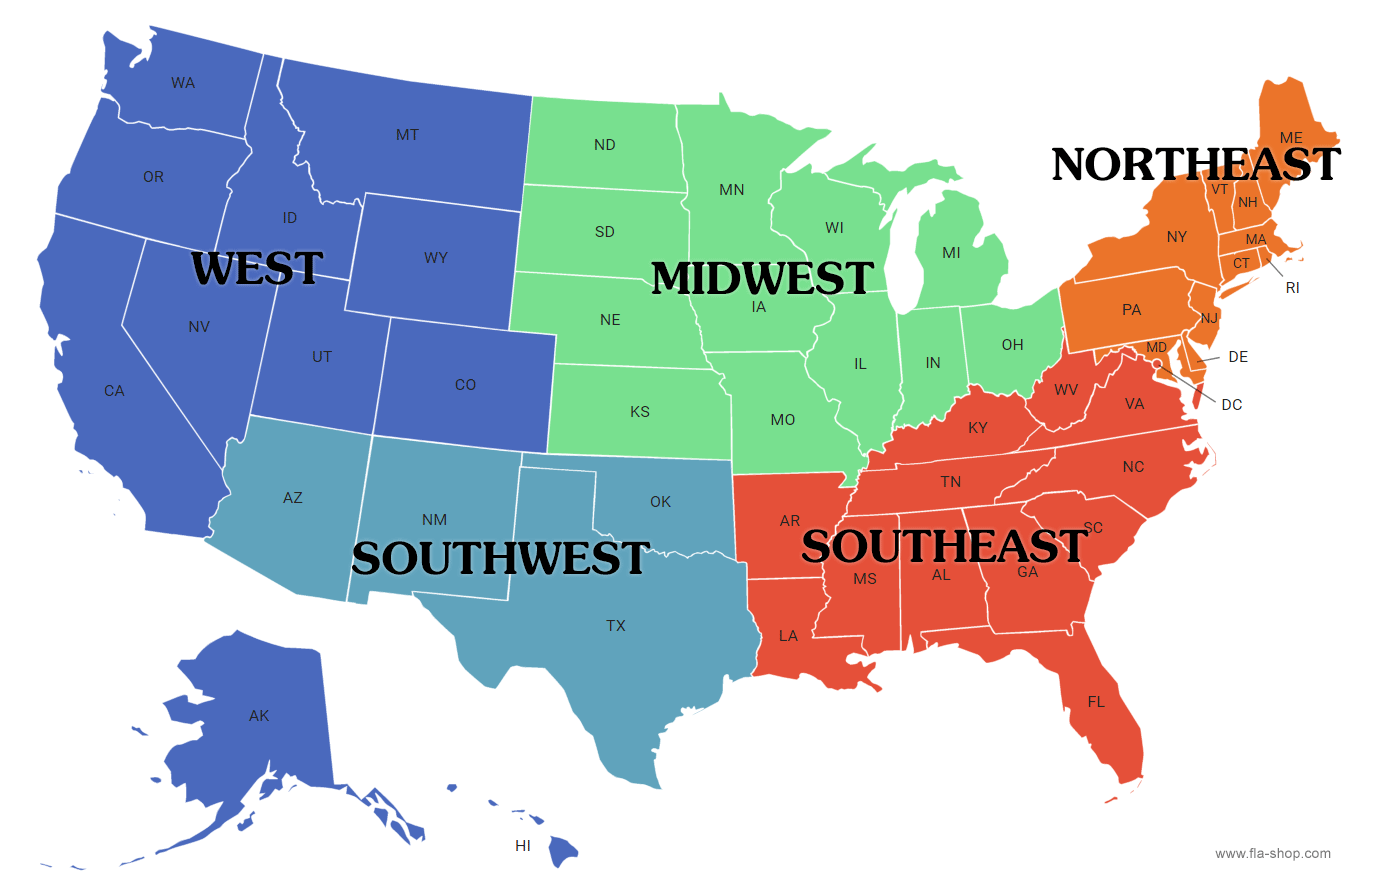 Map of the U.S. with 5 regions